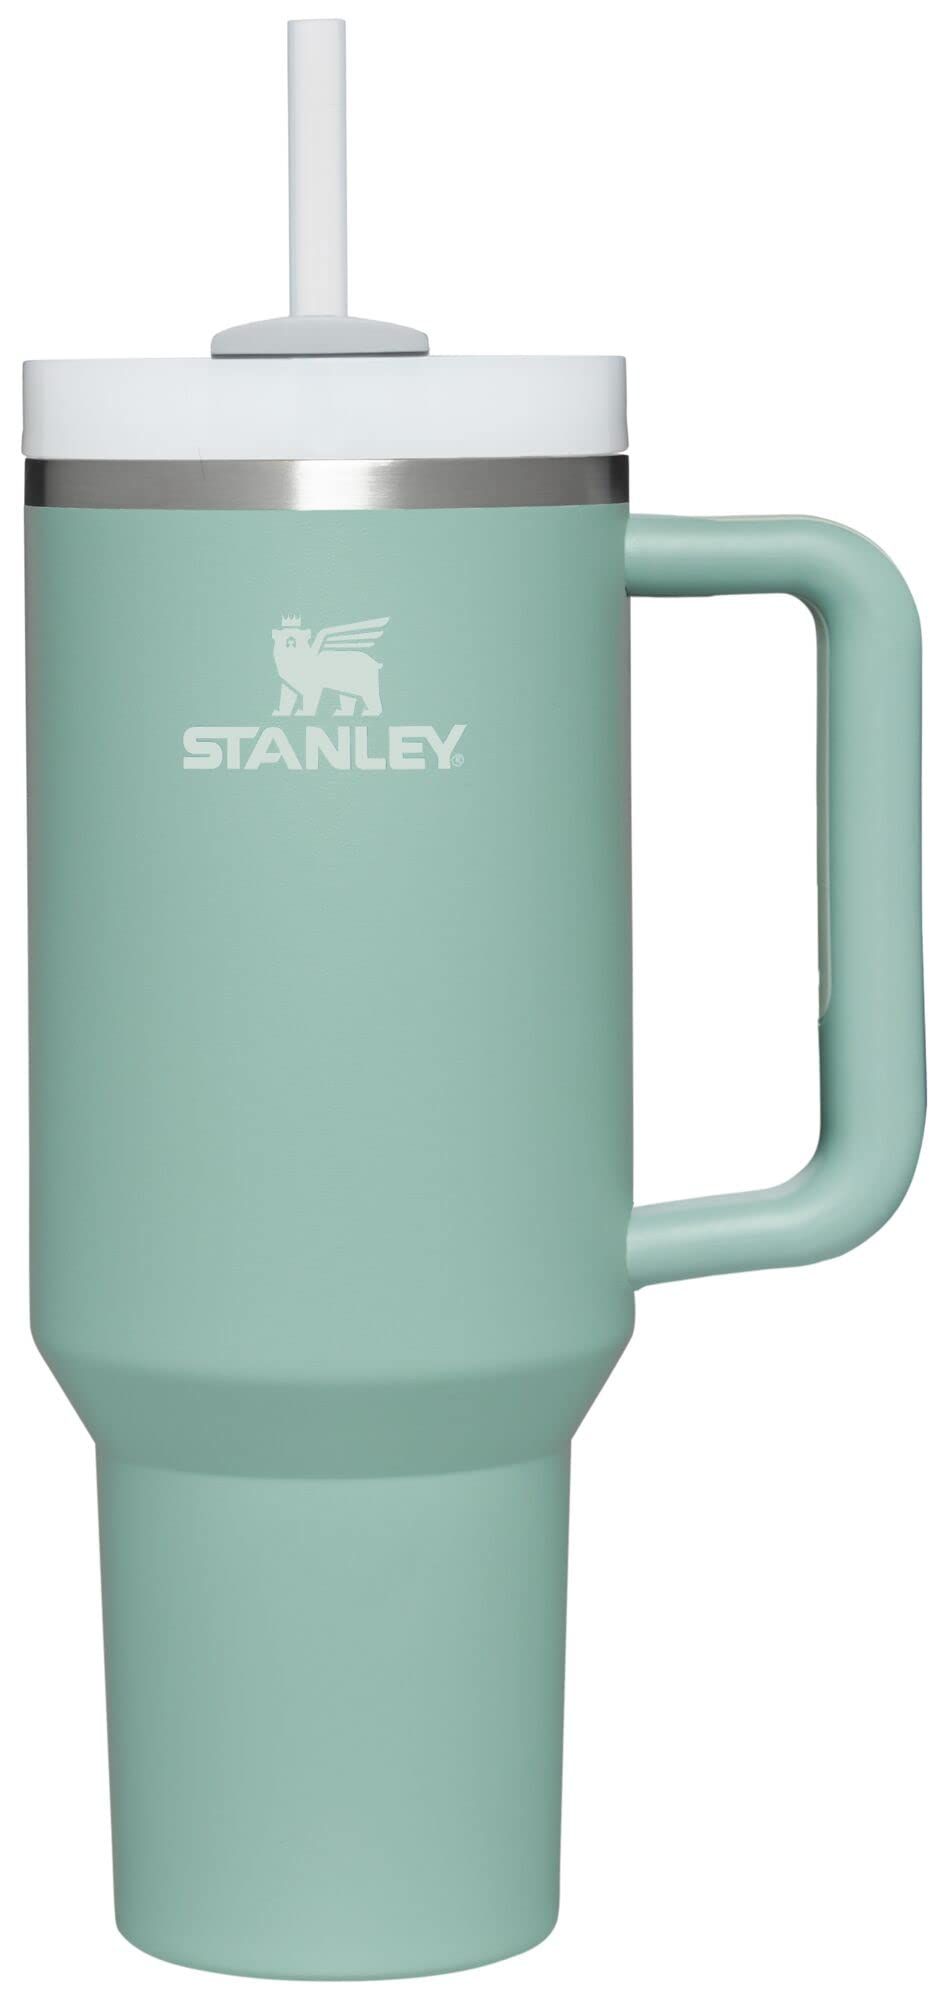 Stsnley Cup | Amazon (US)